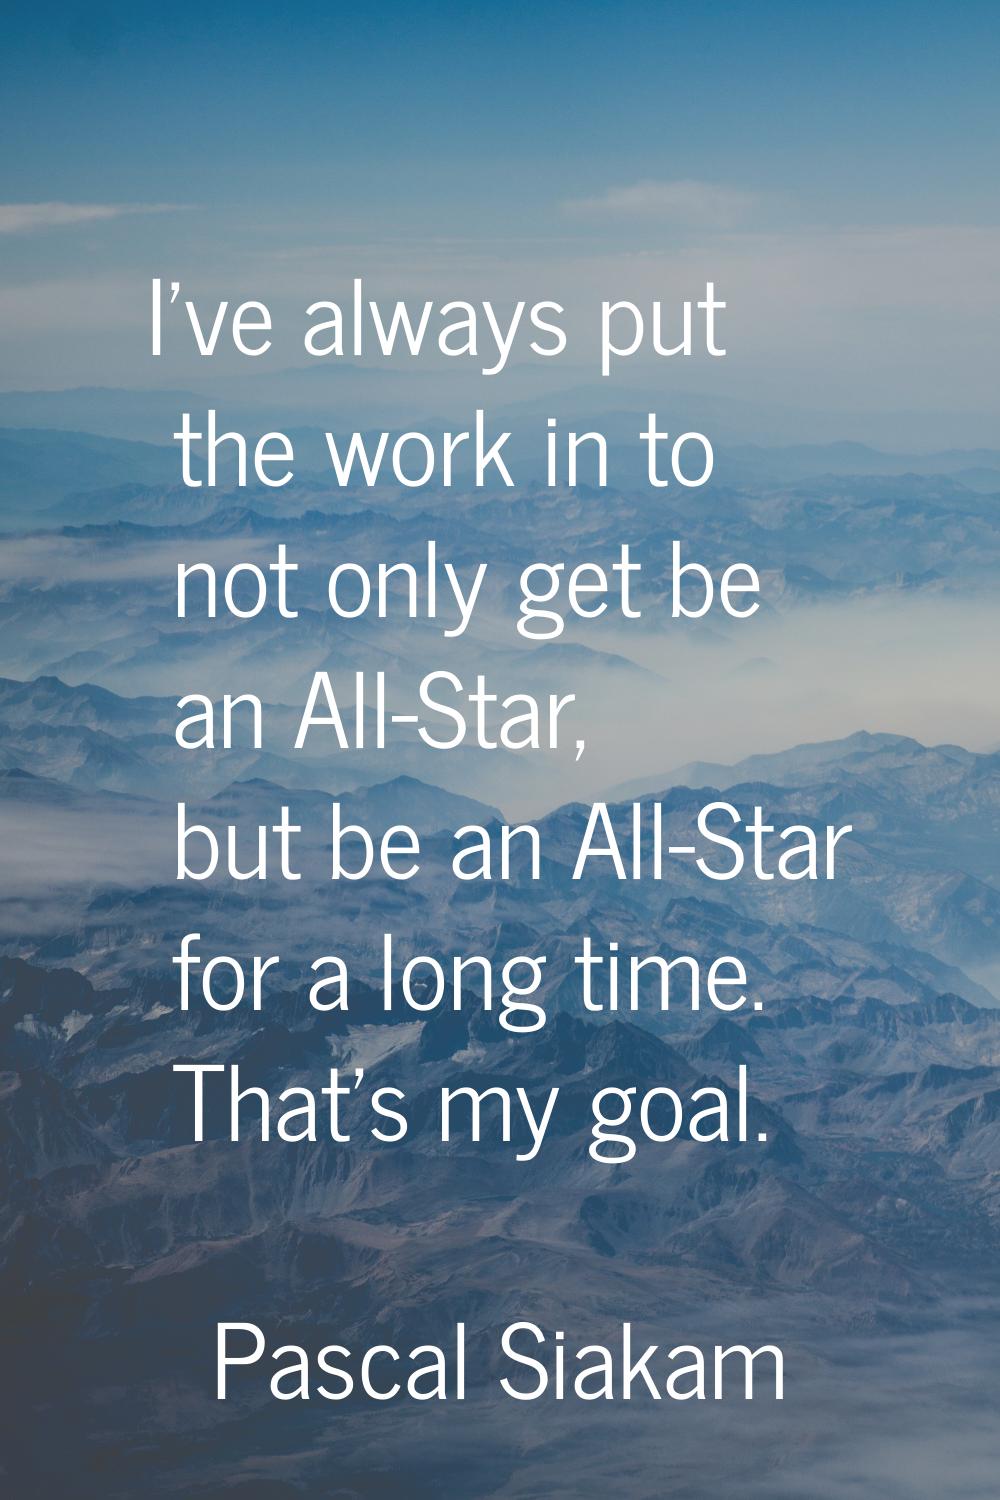 I've always put the work in to not only get be an All-Star, but be an All-Star for a long time. Tha